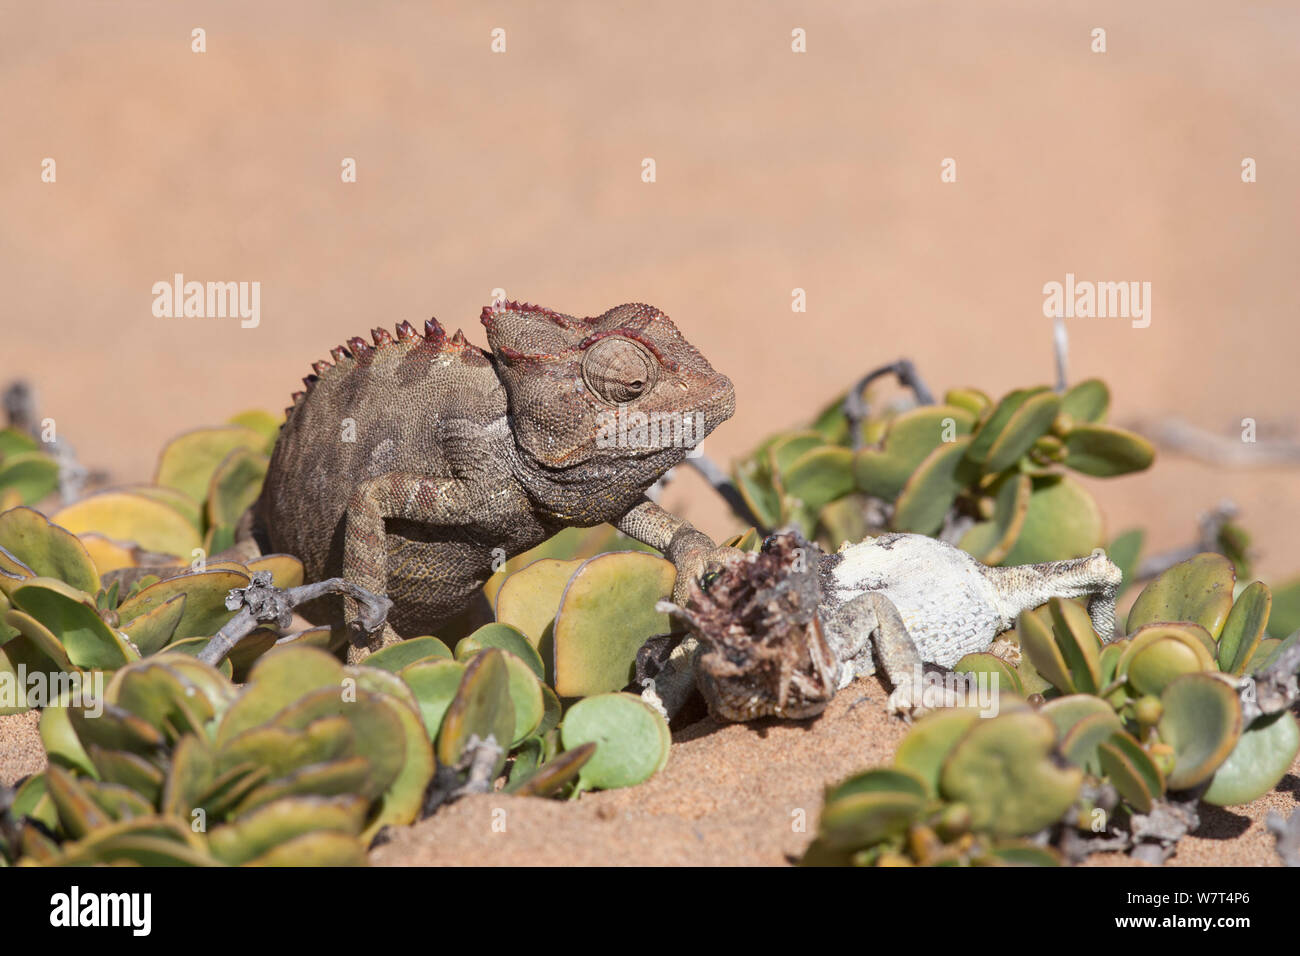 Namaqua chameleon (Chamaeleo namaquensis) with remains of rival male killed in fight, Namib desert, Namibia, Africa (May ) Stock Photo